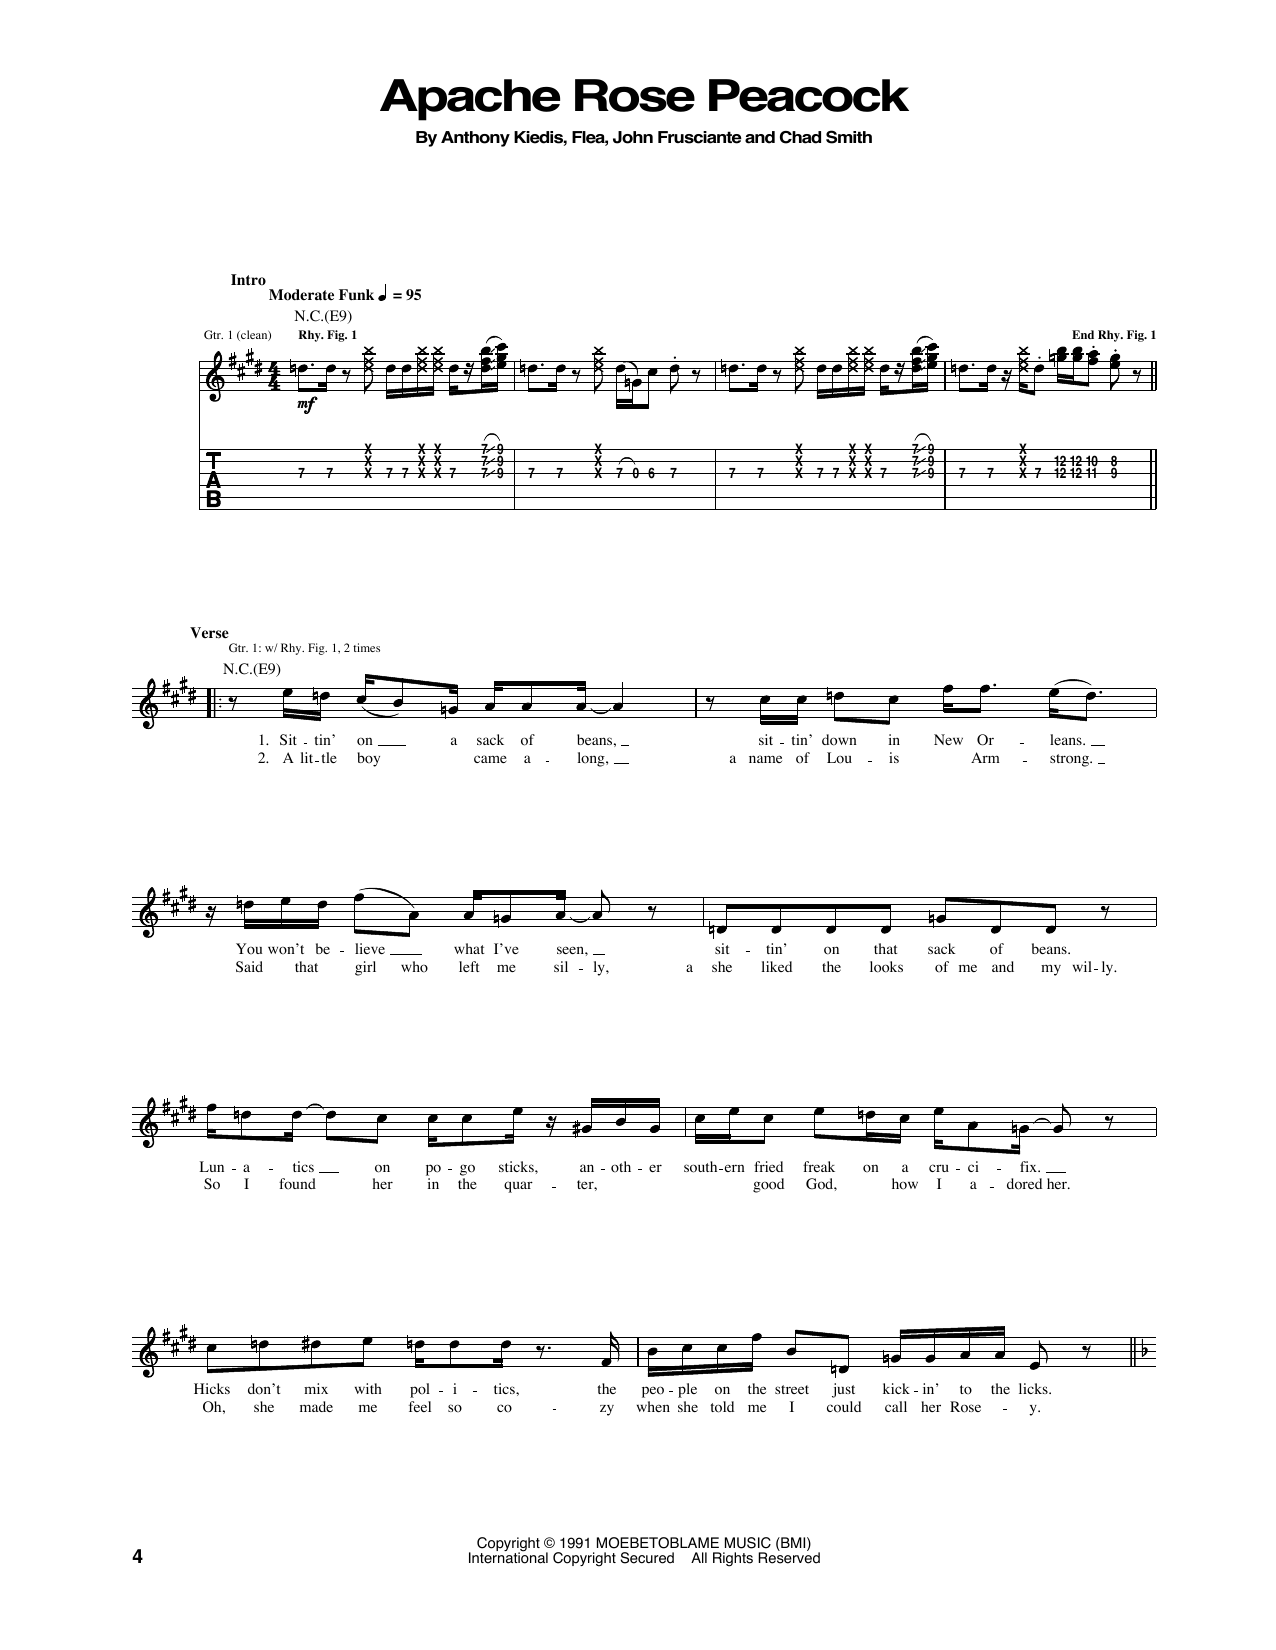 Download Red Hot Chili Peppers Apache Rose Peacock Sheet Music